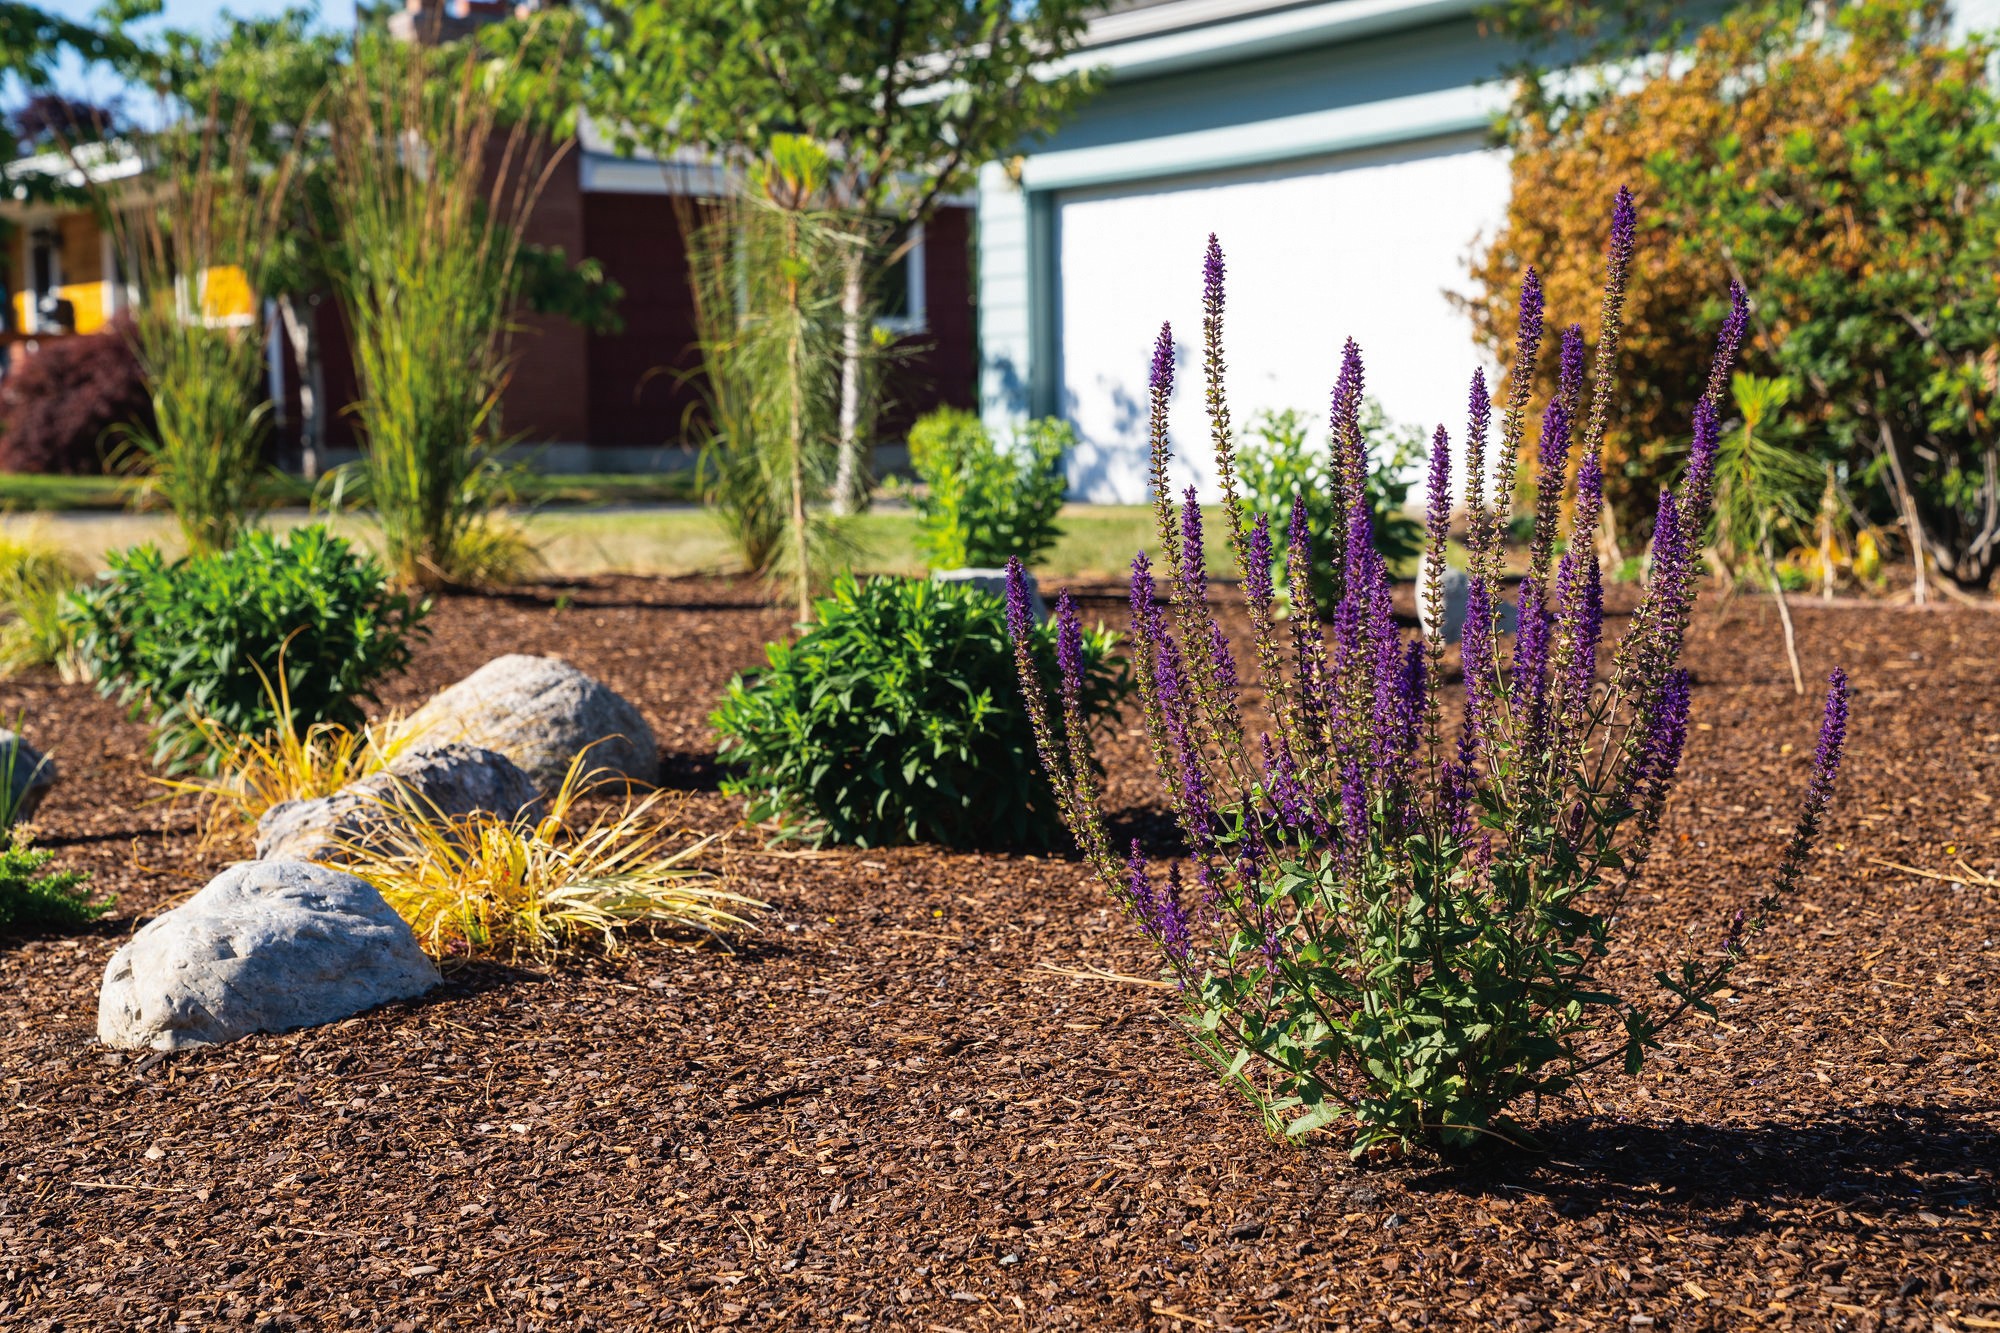 Xeriscaping is a way to save water and reduce maintenance - all without sacrificing curb appeal